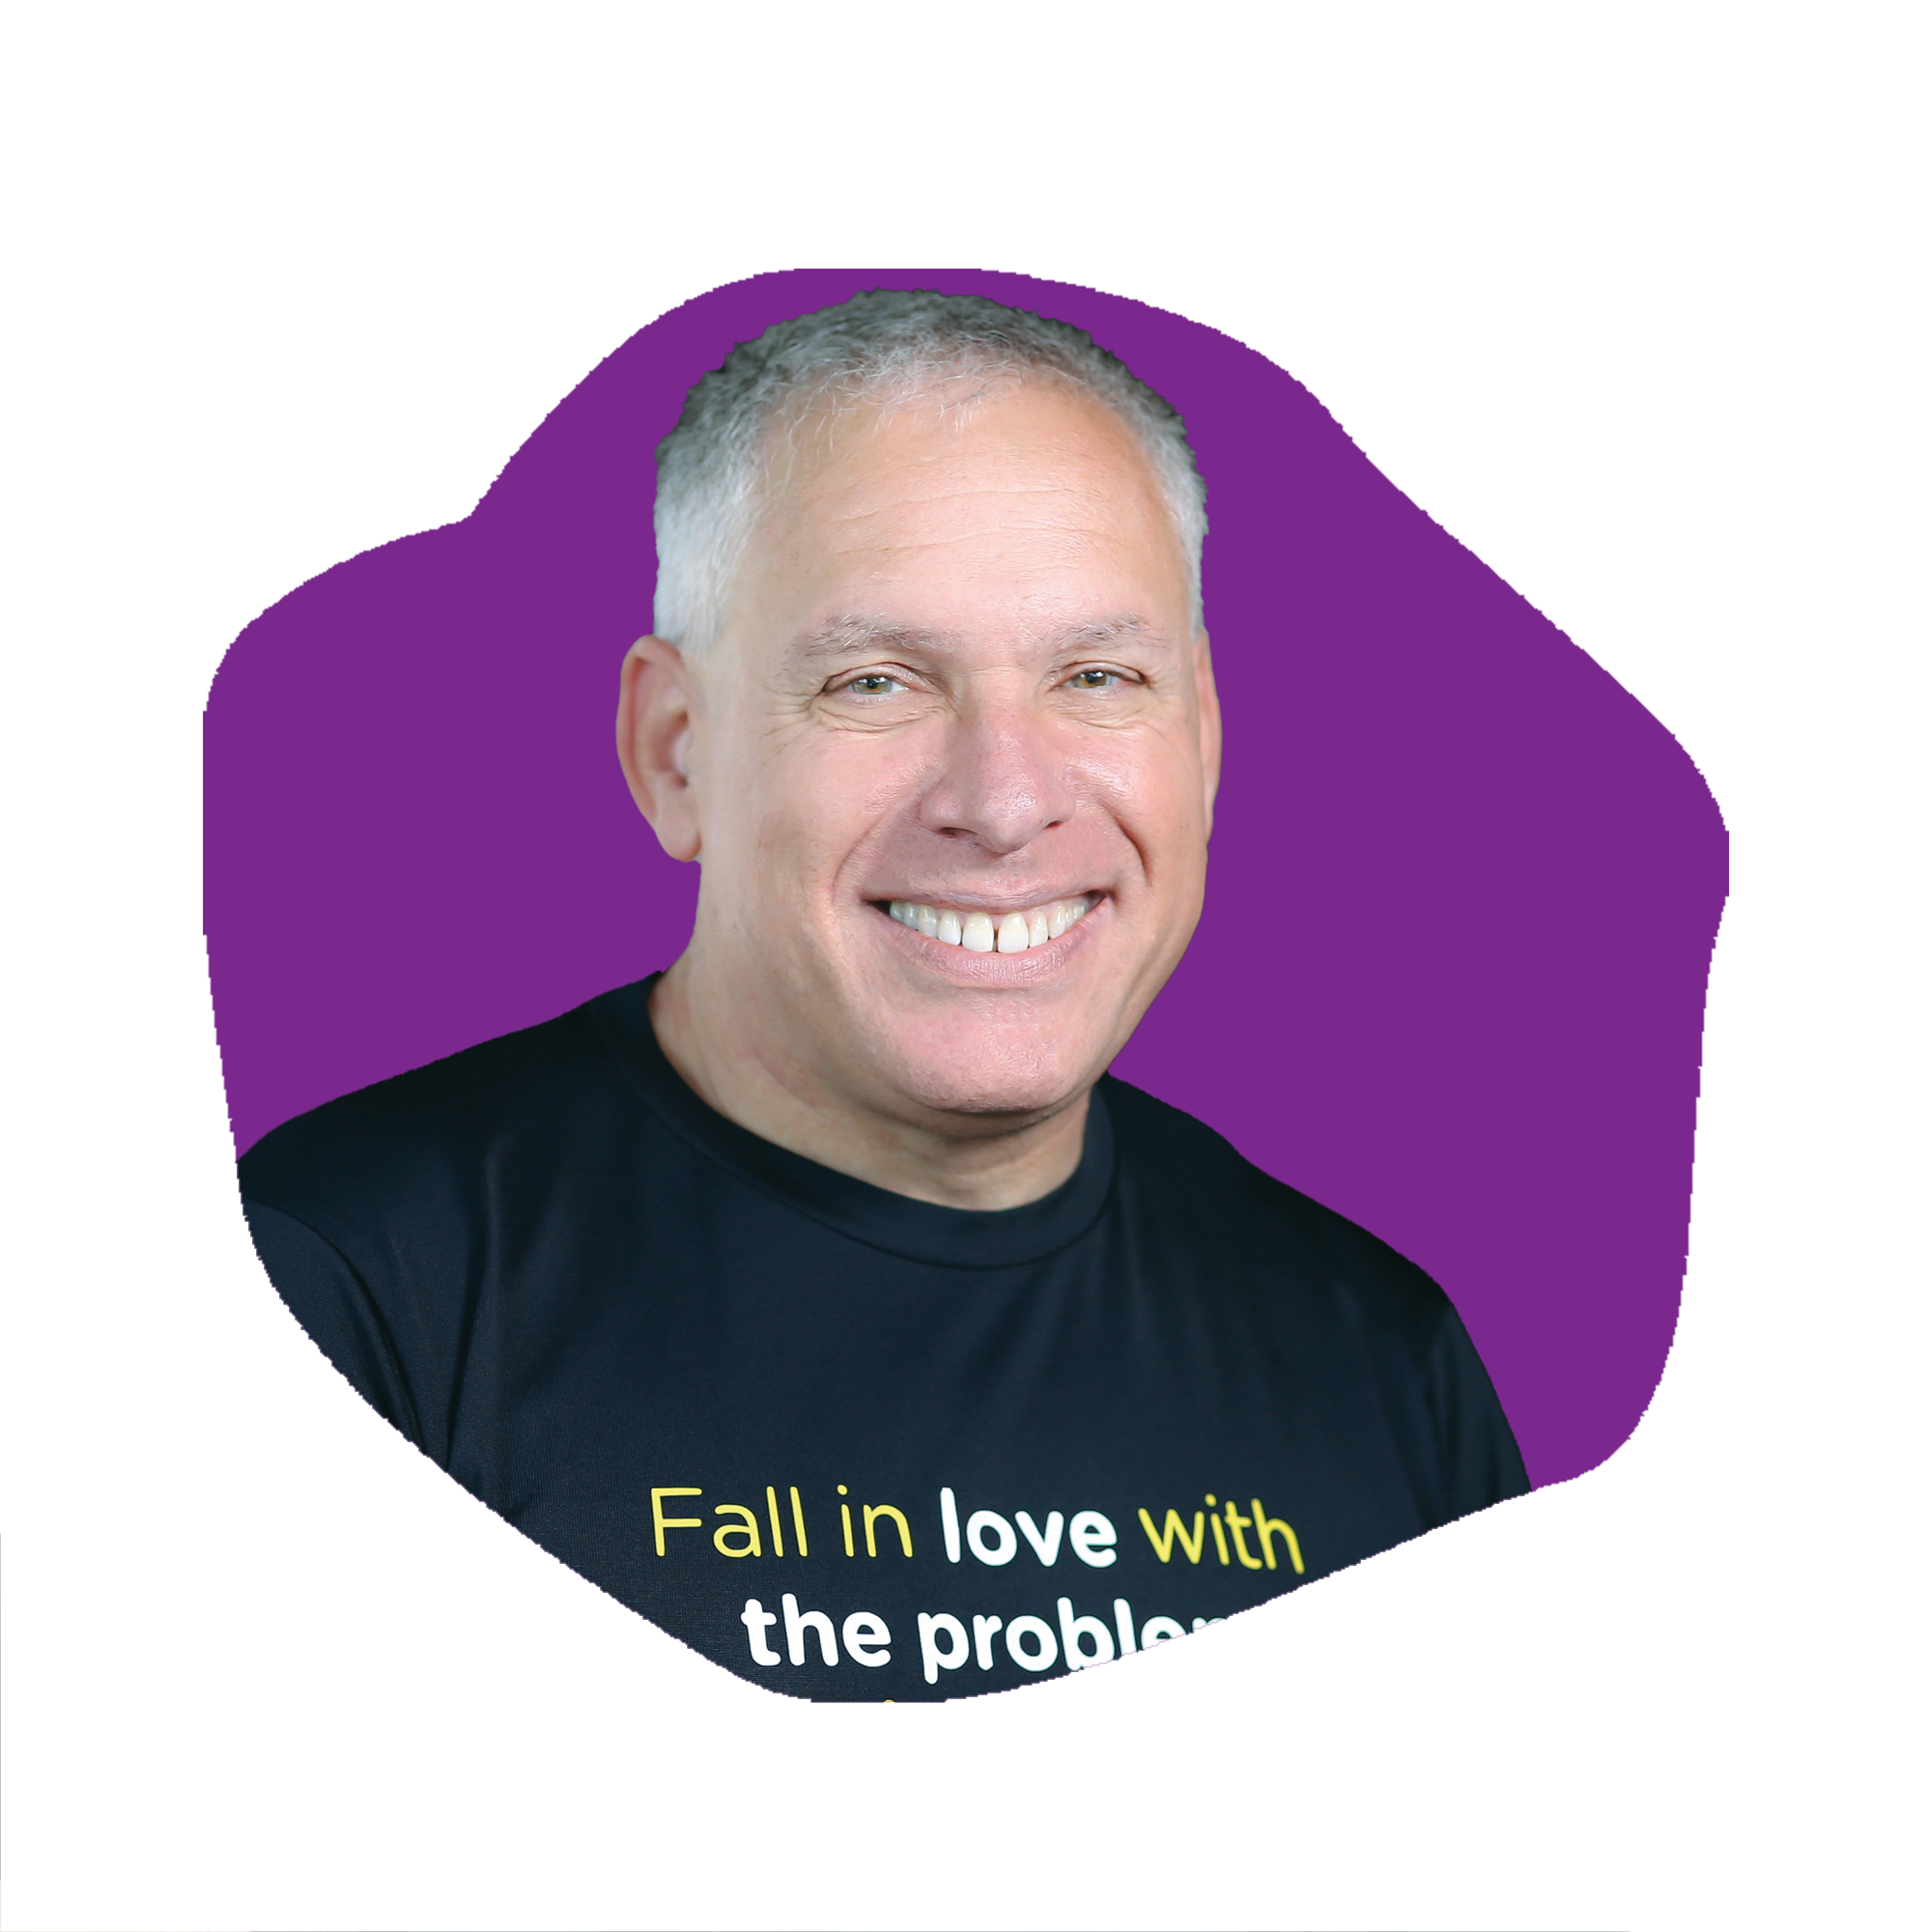 Uri Levine CoFounder of Waze & Author of Fall In Love With The